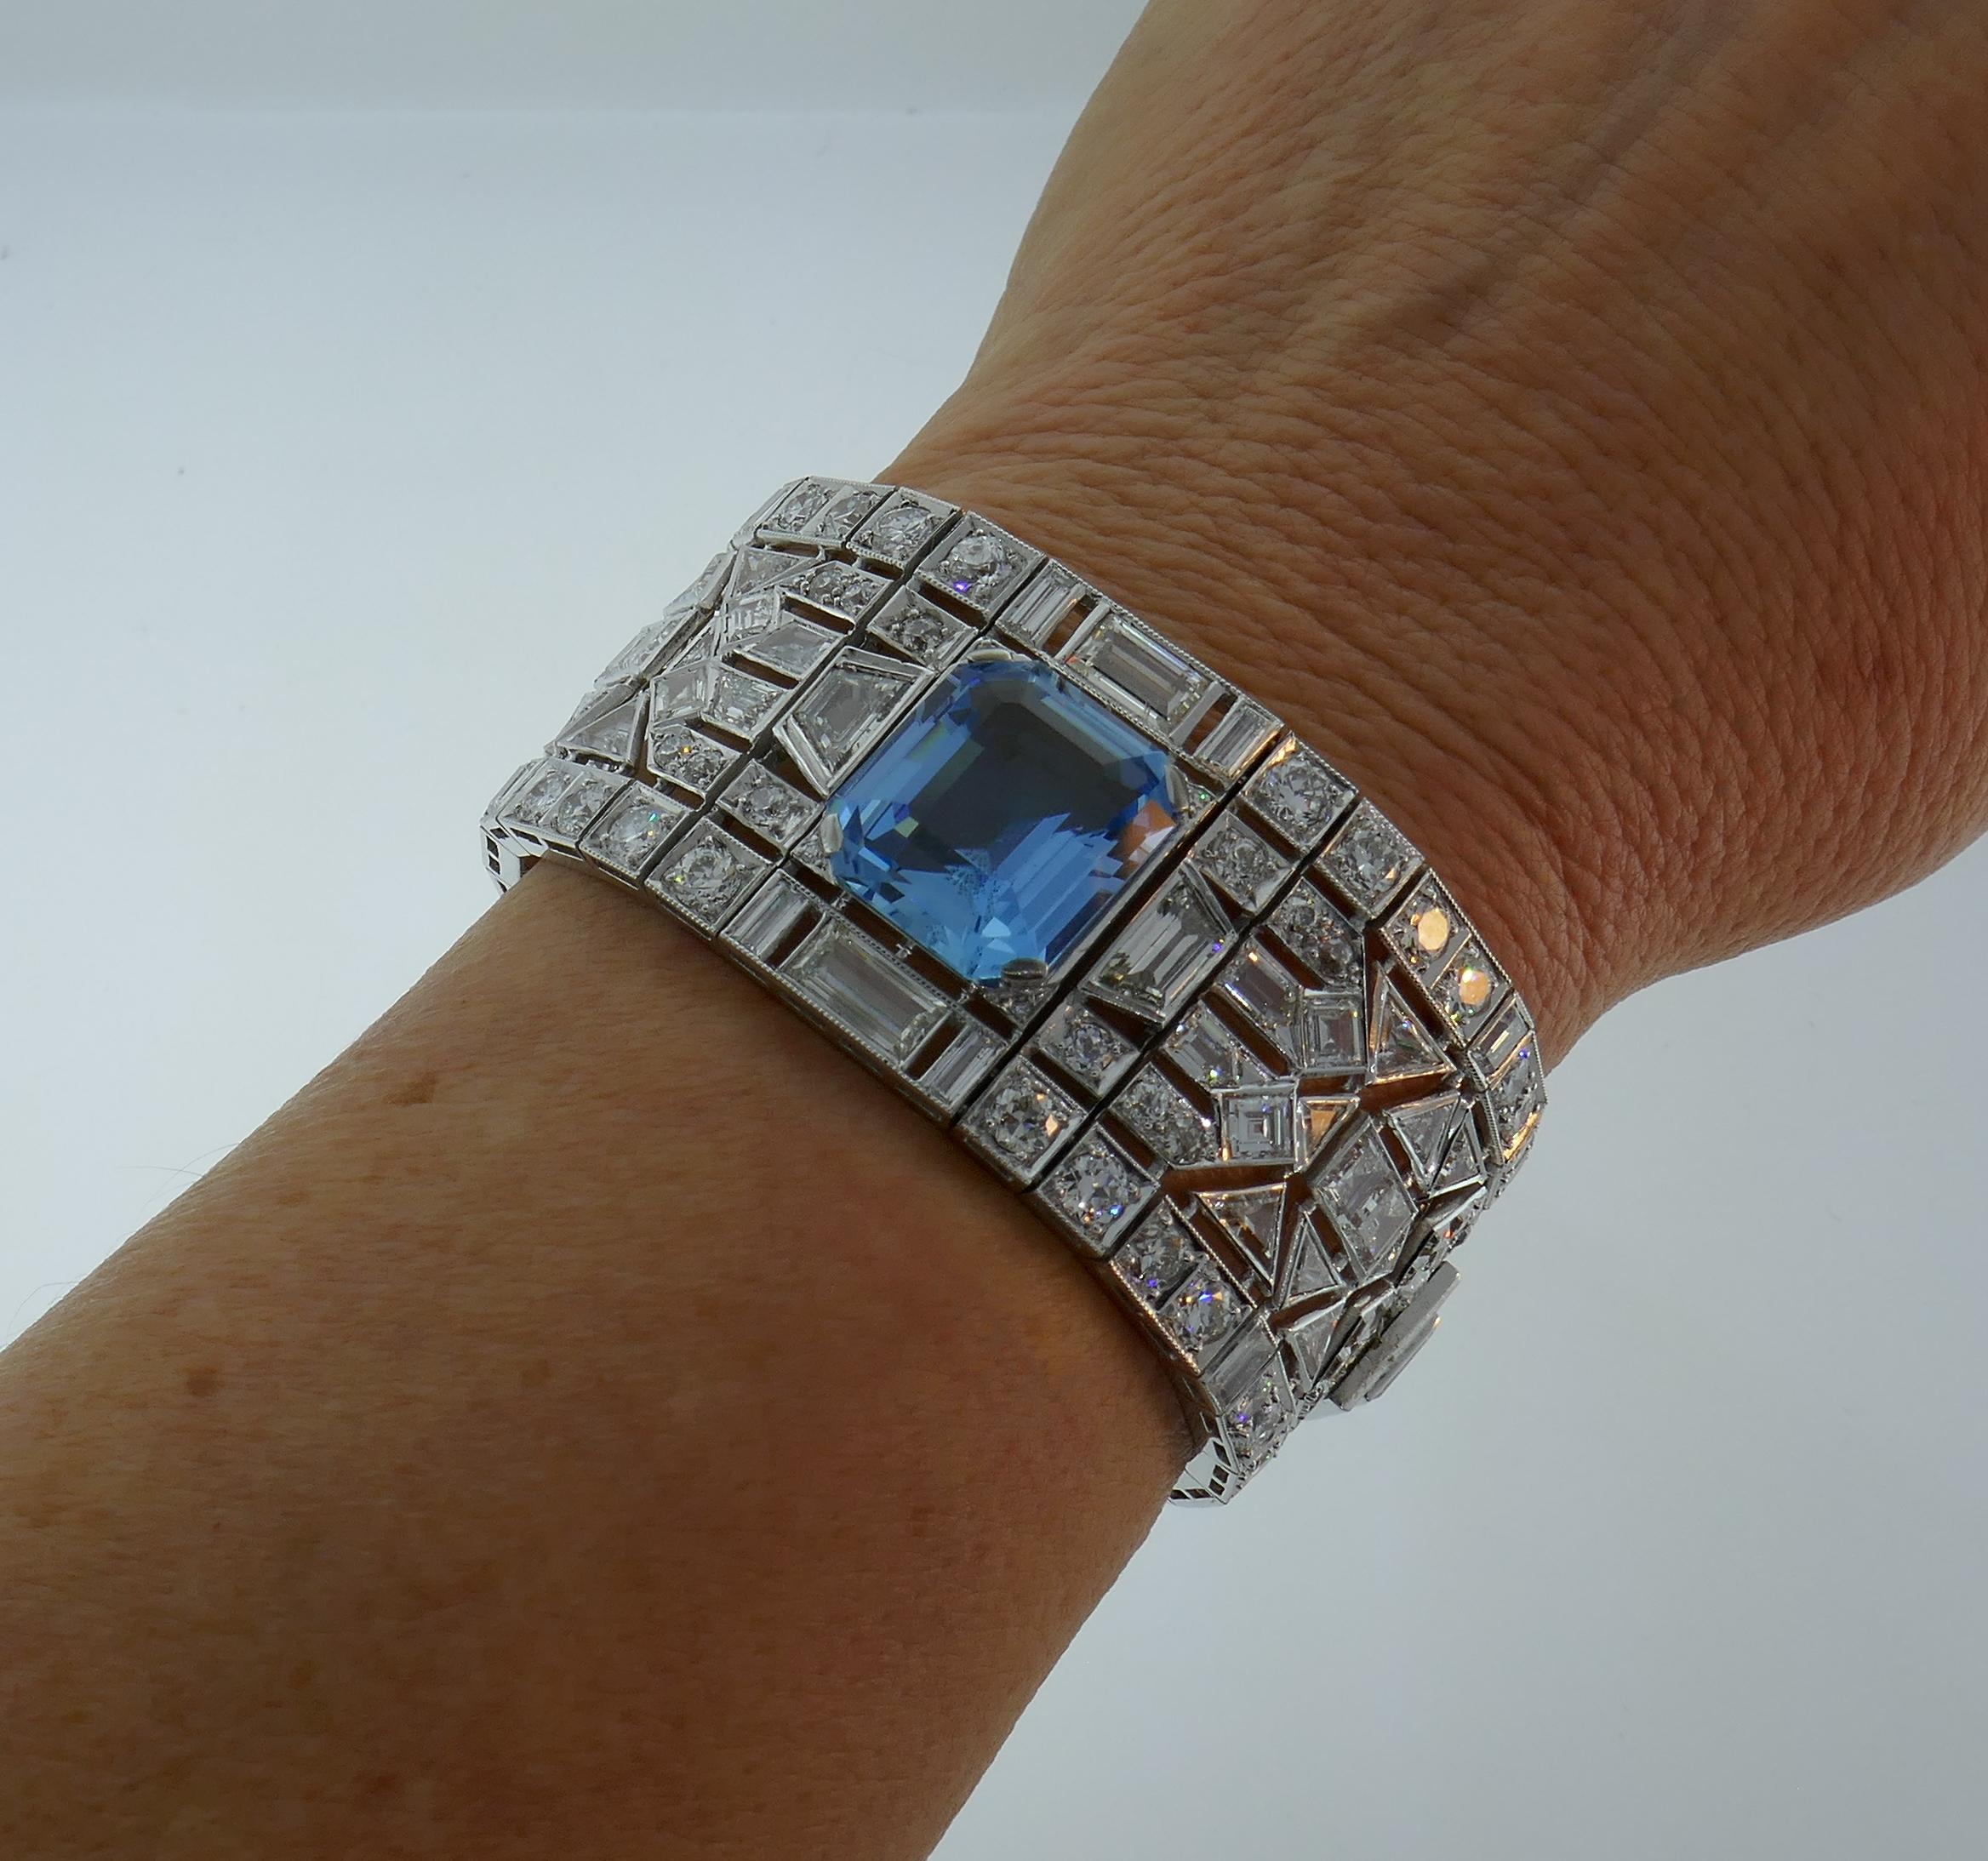 Gorgeous Art Deco Revival bracelet created in the 1960's. It features an approximately 15.47-ct emerald cut aquamarine and approximately 54.50 carats of various cuts of diamonds - old European, asscher, emerald, baguette, triangle, trapezoid,